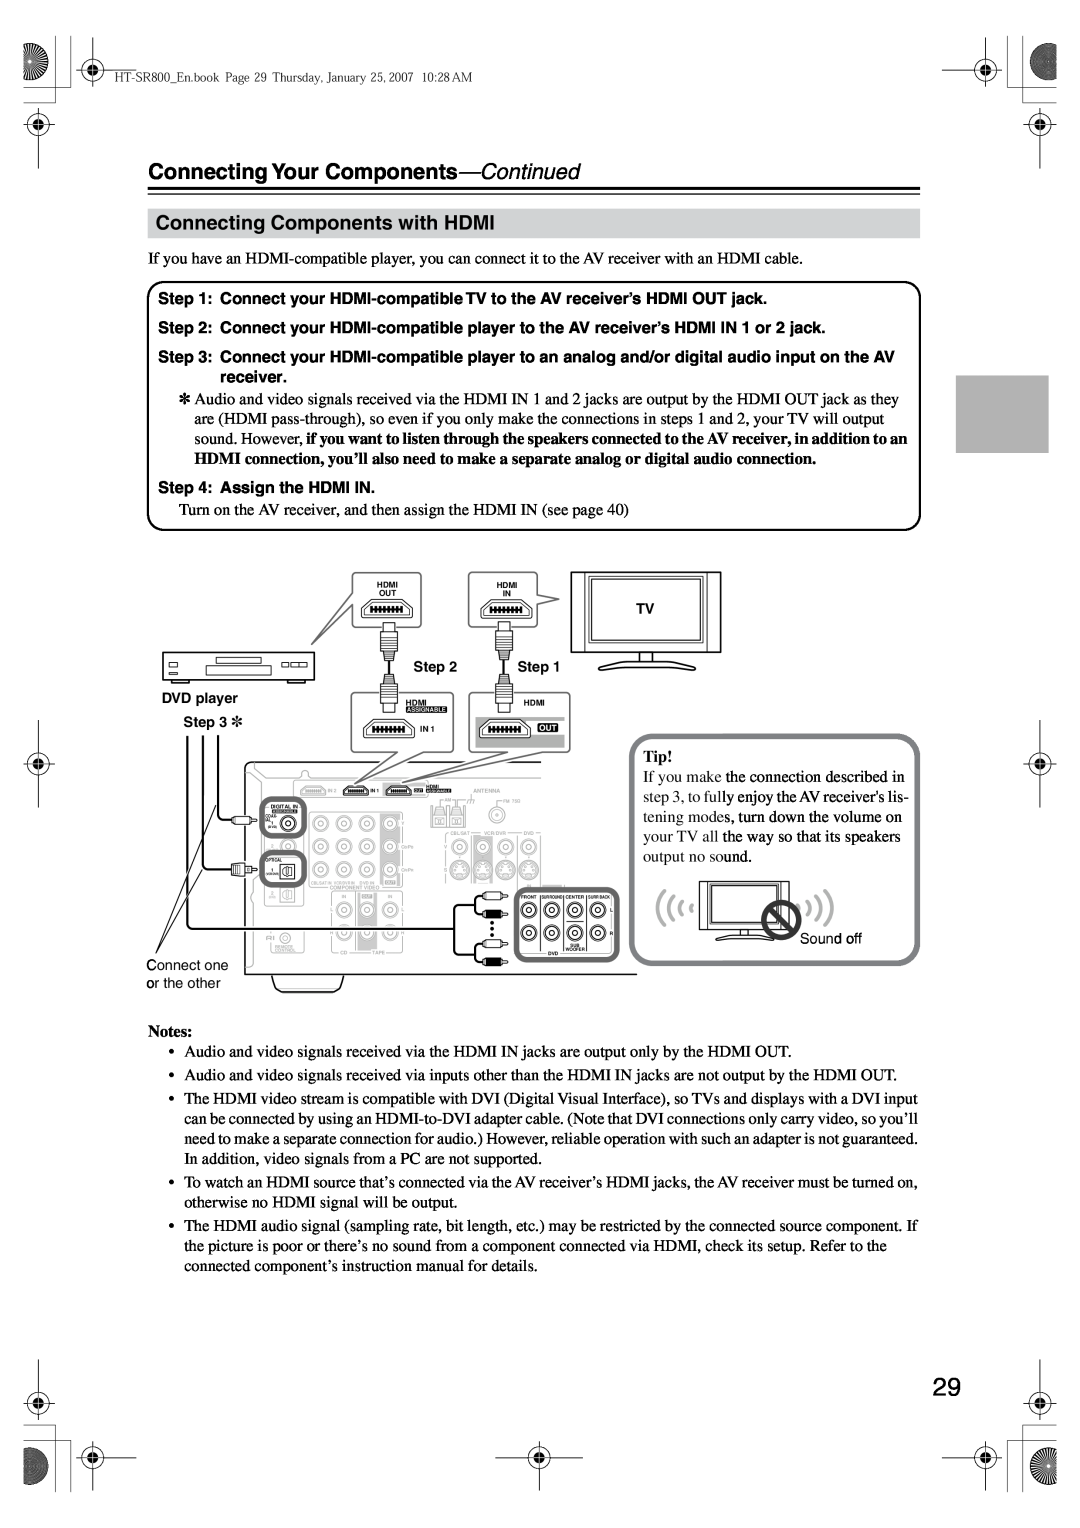 Onkyo HT-SR800 instruction manual Connecting Components with HDMI, Connecting Your Components-Continued, output no sound 